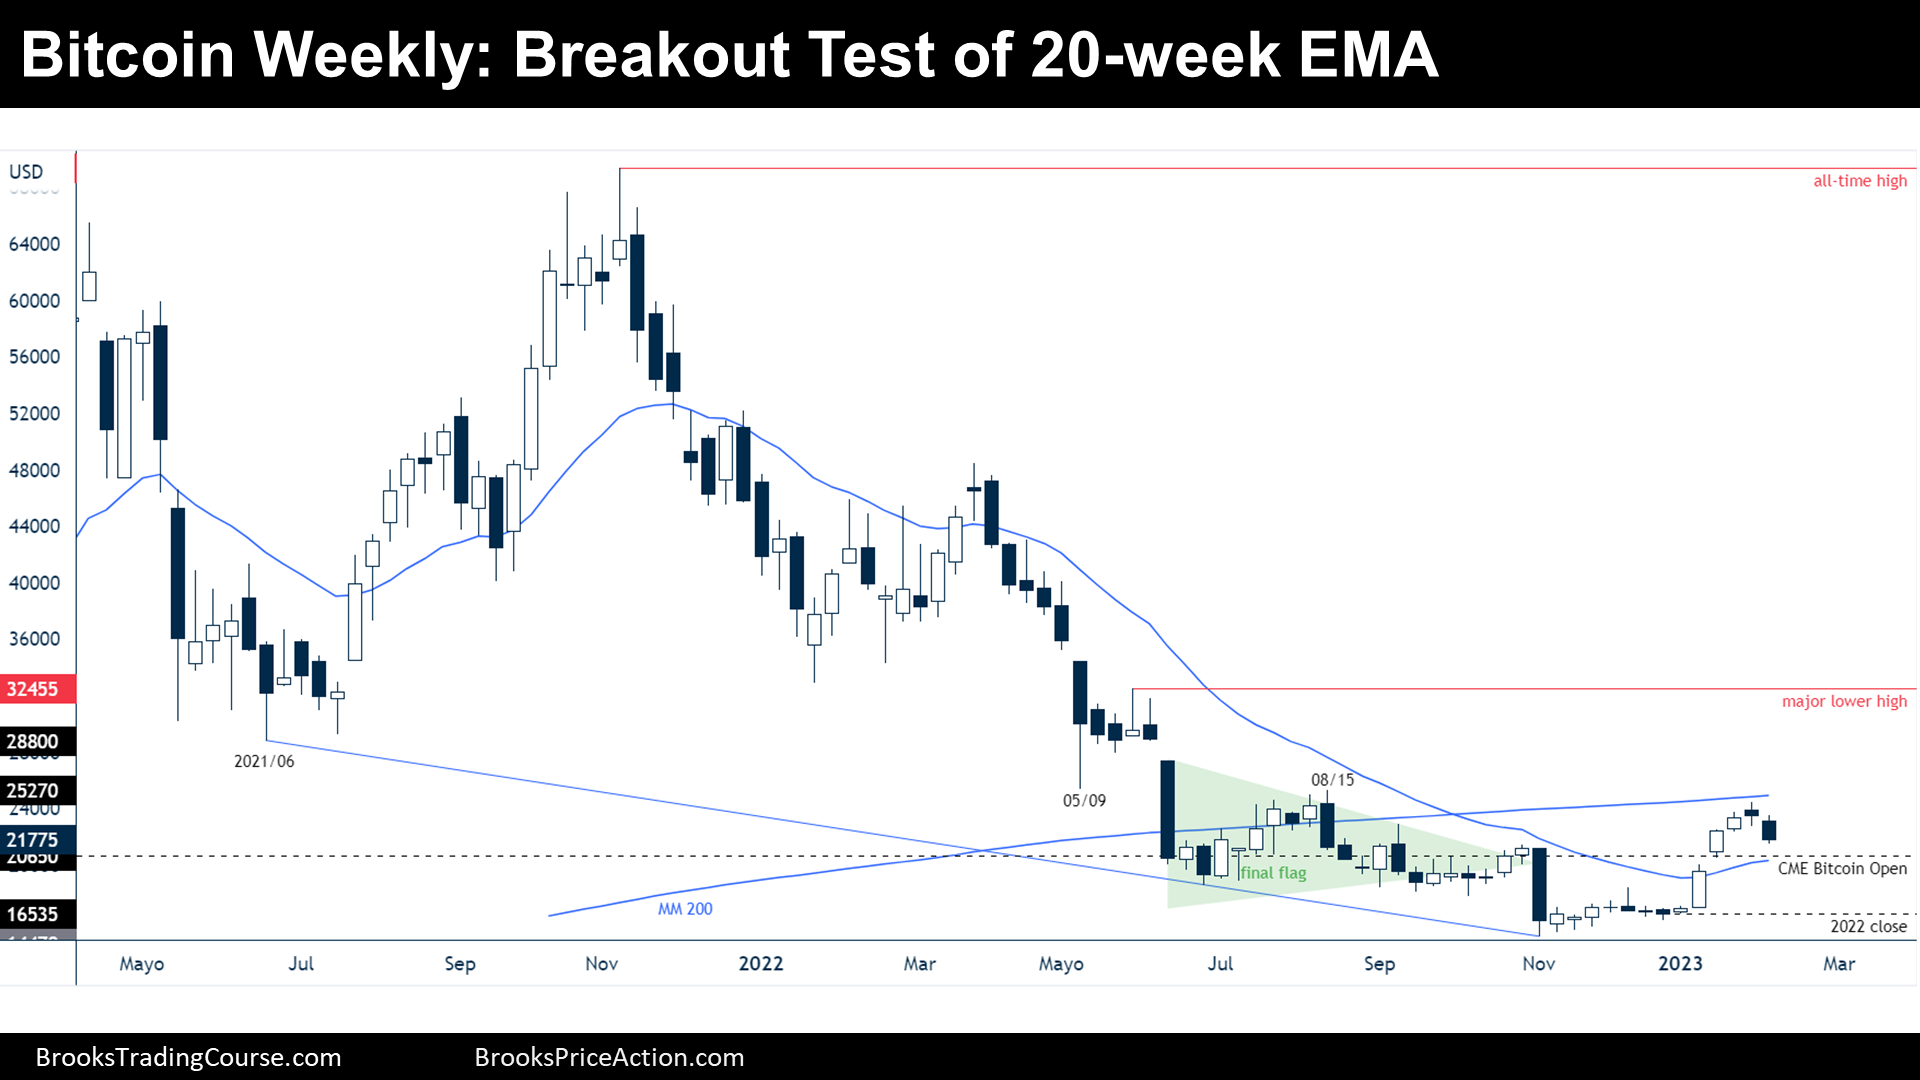 Bitcoin breakout test of 20-week EMA on weekly chart